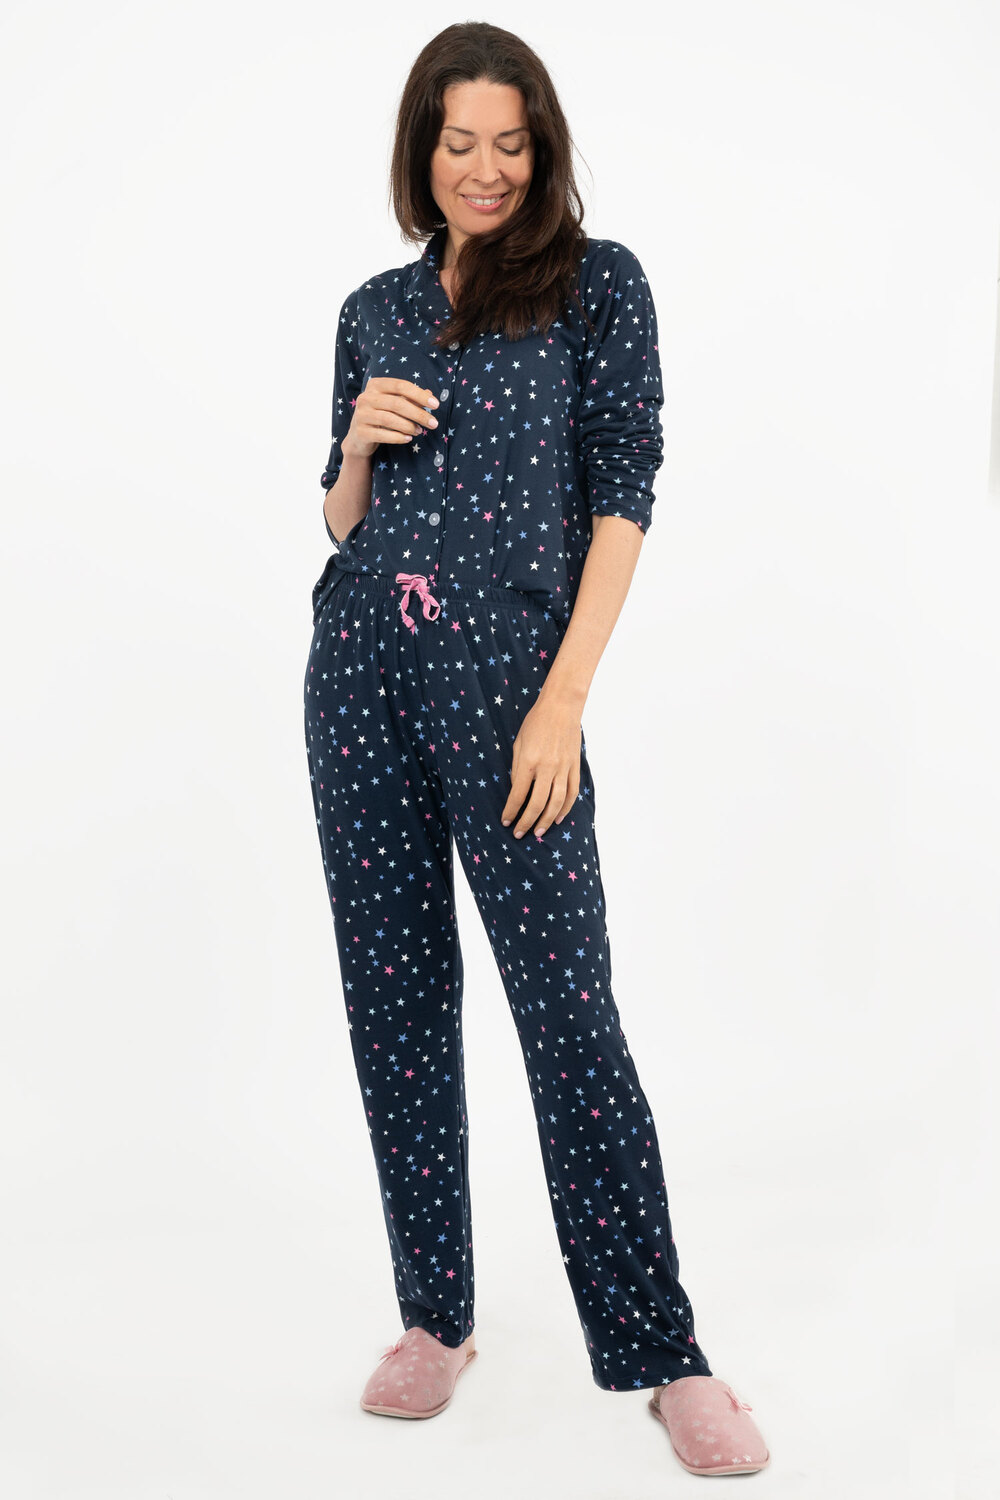 Charmour - Button-up PJ gift set with notch collar - Navy bright stars